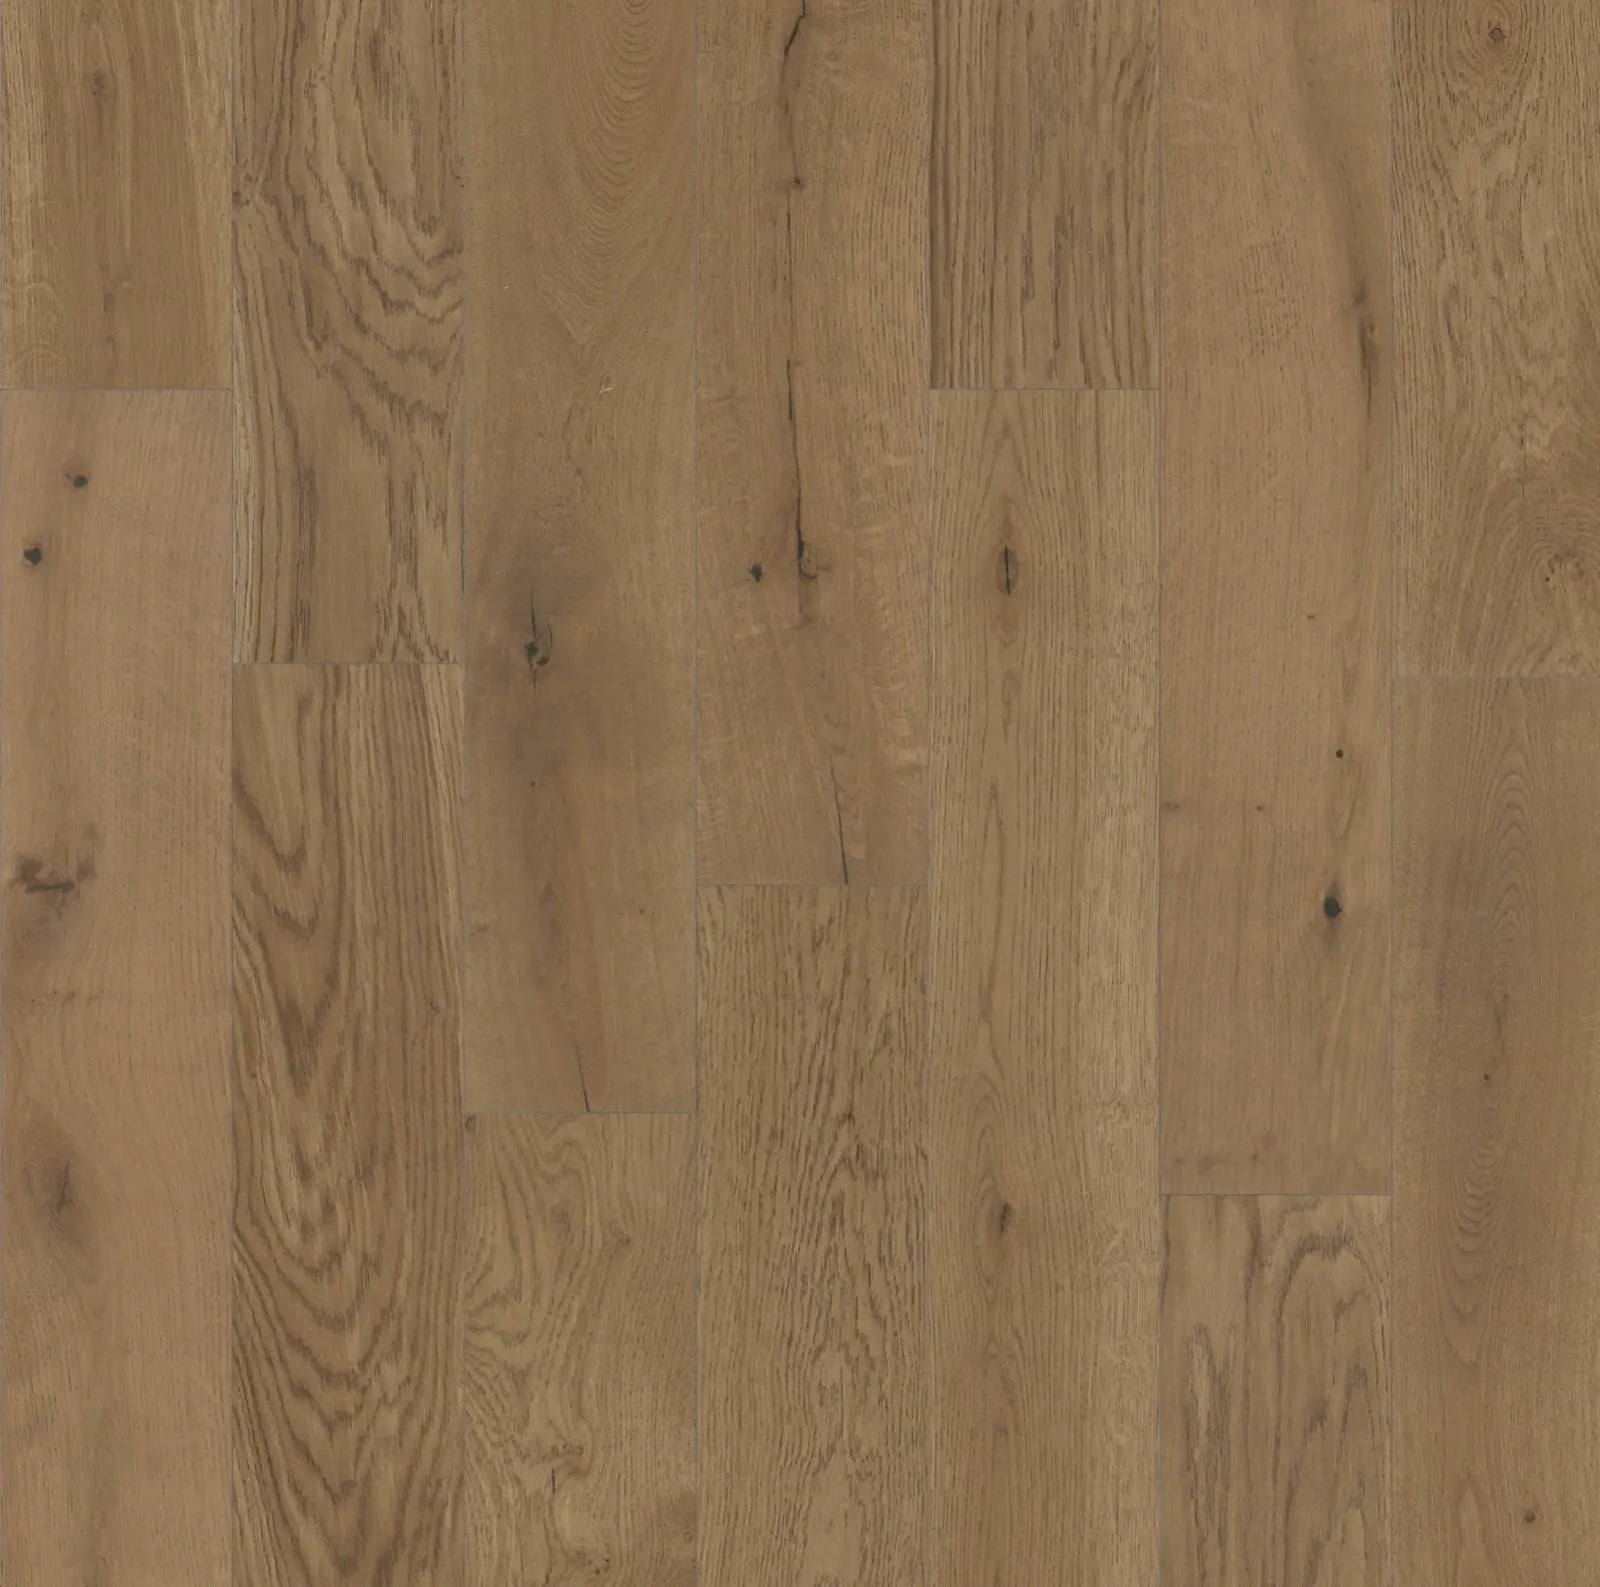 MSW73 Oak Alpine Oak 3/8 x 6-1/2" Wire Brushed Engineered- Call 844-356-6711 for BEST price! MW floors